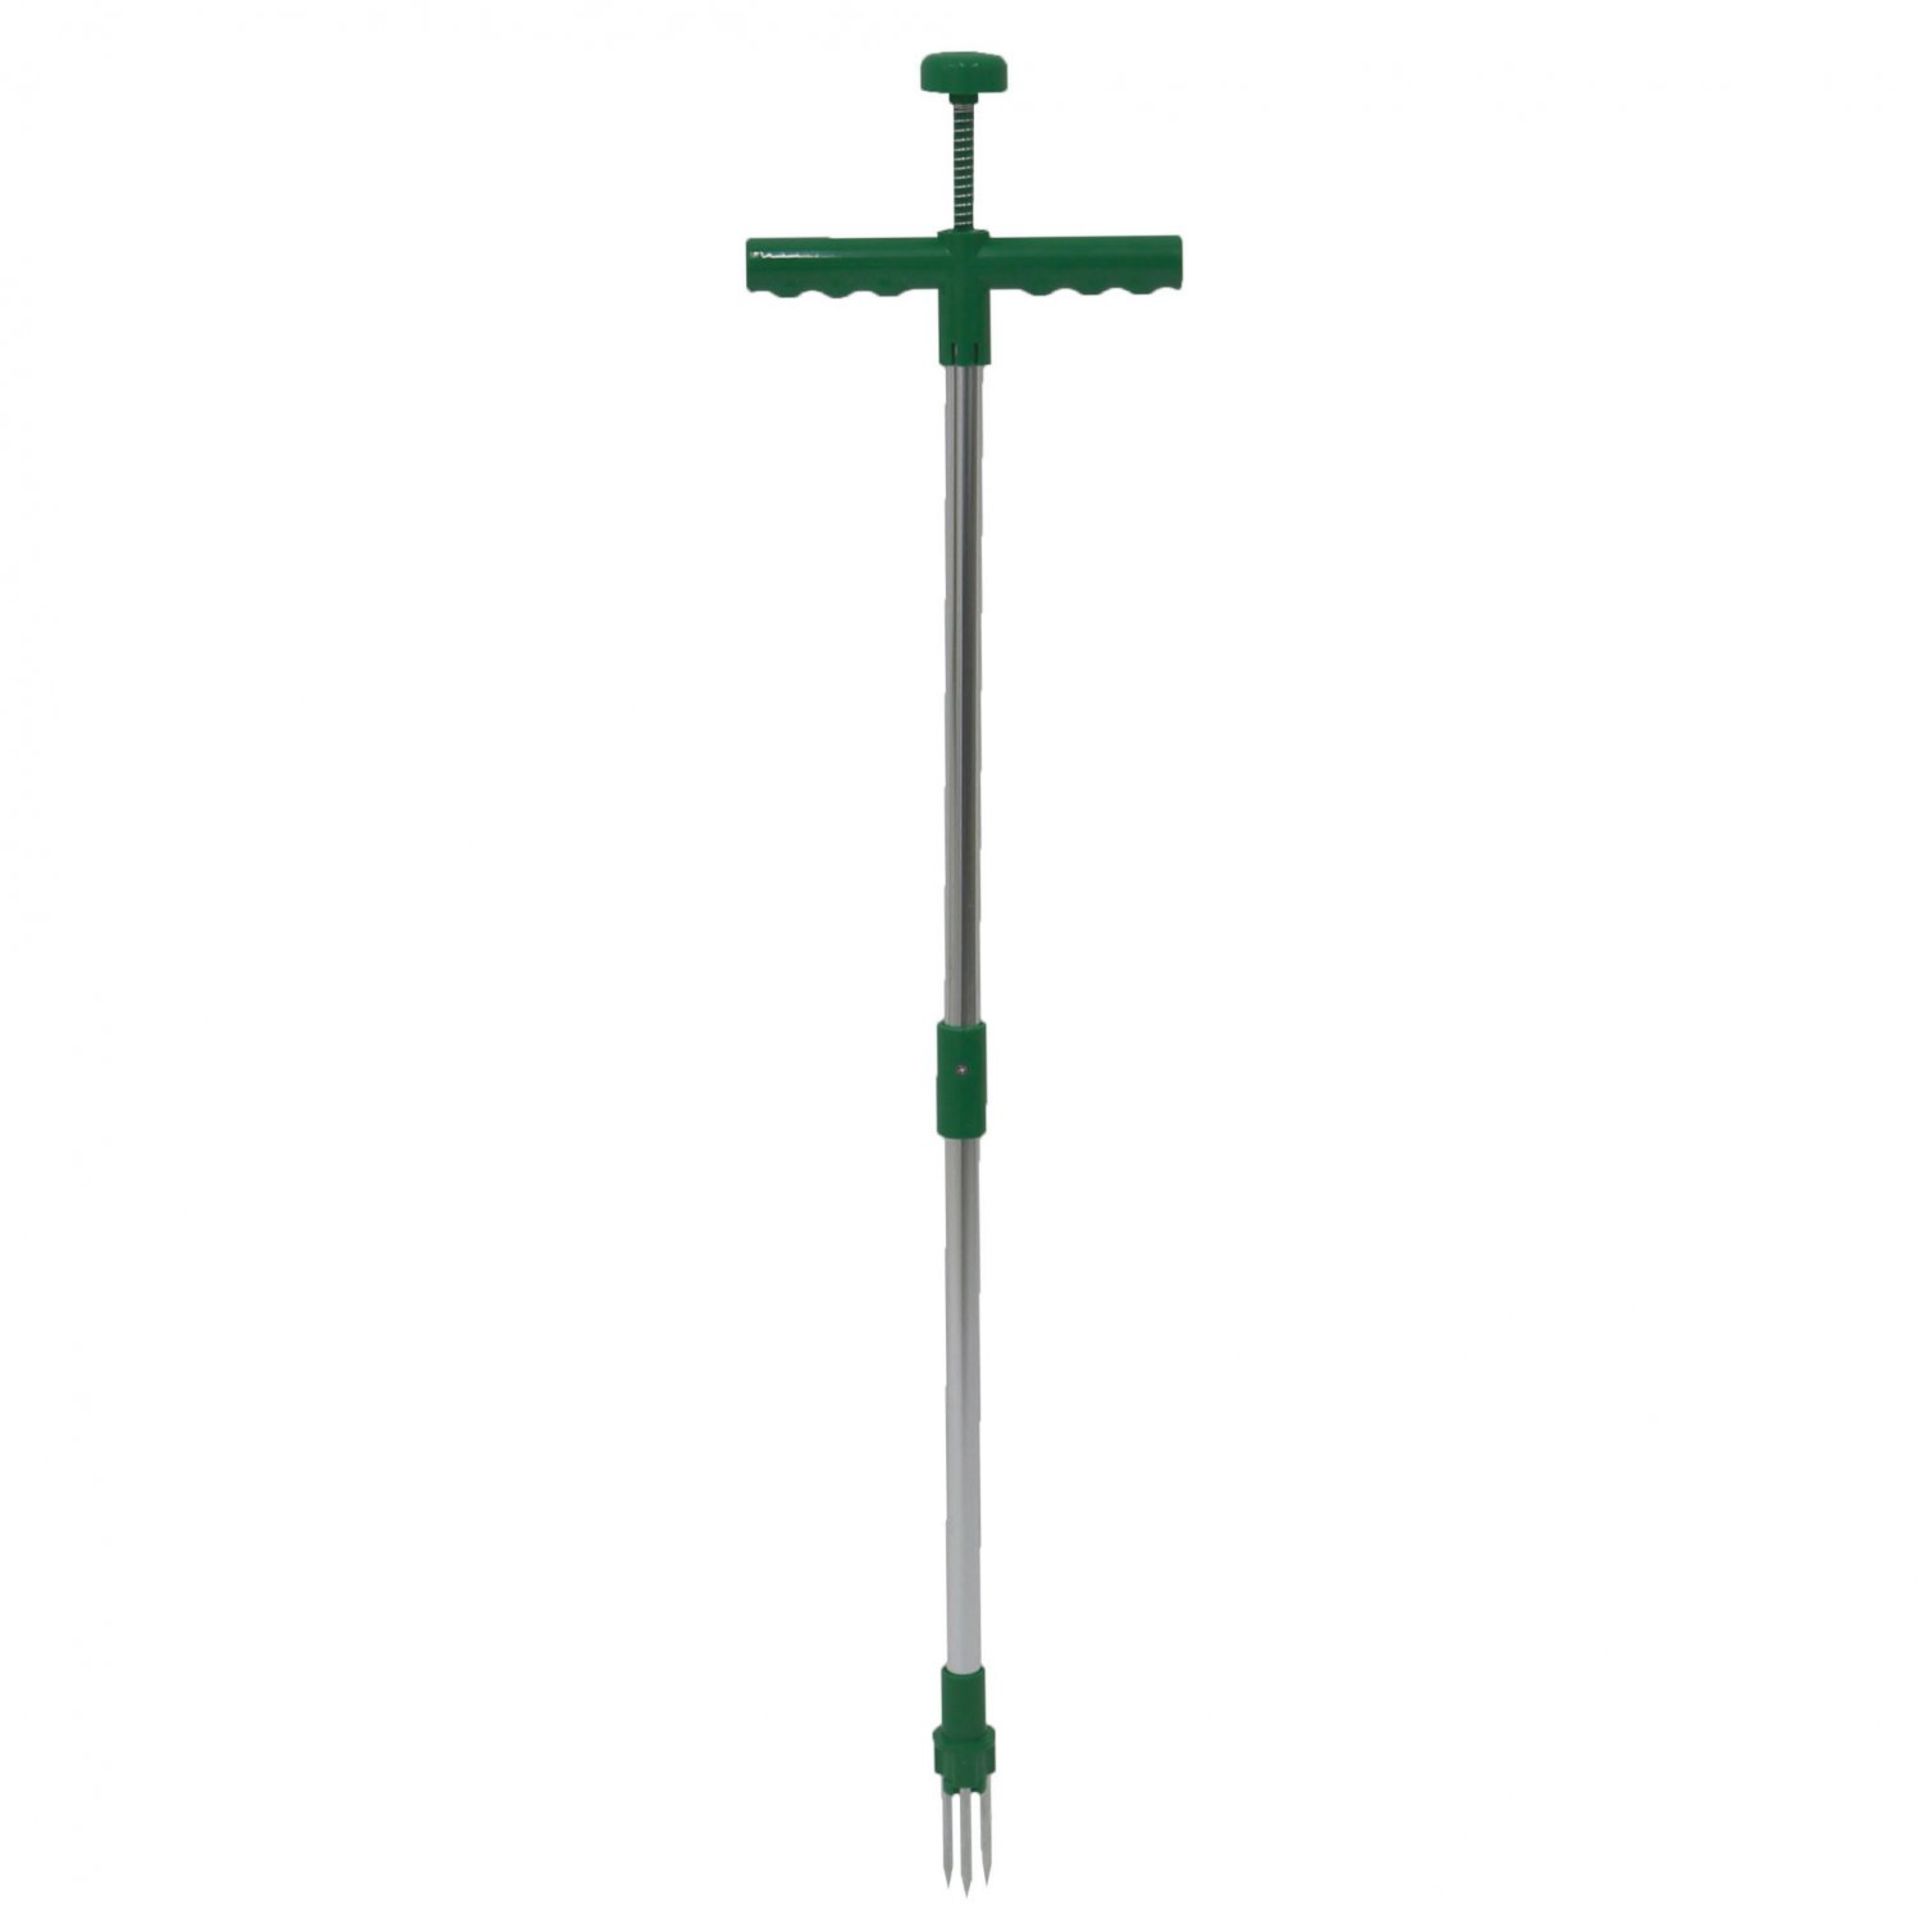 (EE478) Weed Puller Twister Remover Weeder Manual Weeding Garden Tool The weed remover is th... - Image 2 of 2